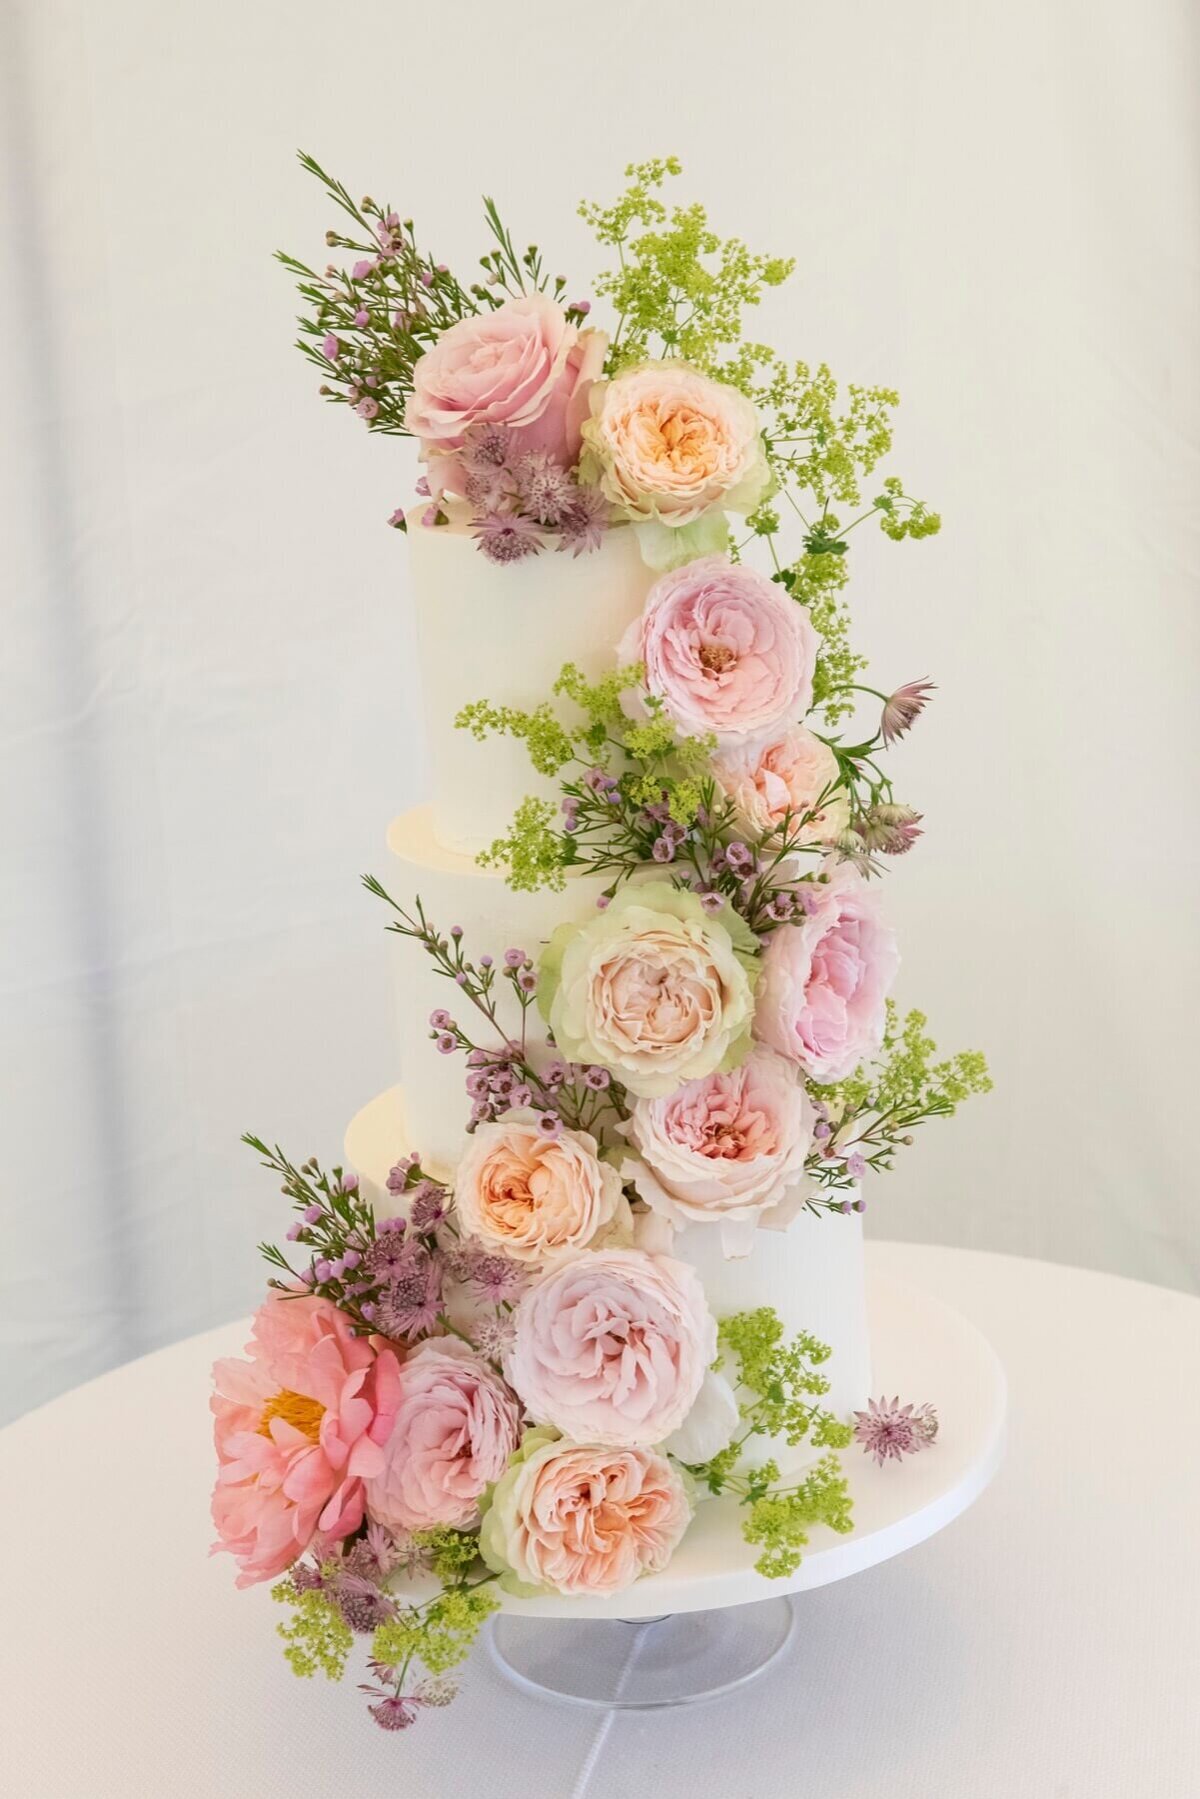 Pale wedding cake with 3 tiers and heavy florals running down the length of the cake